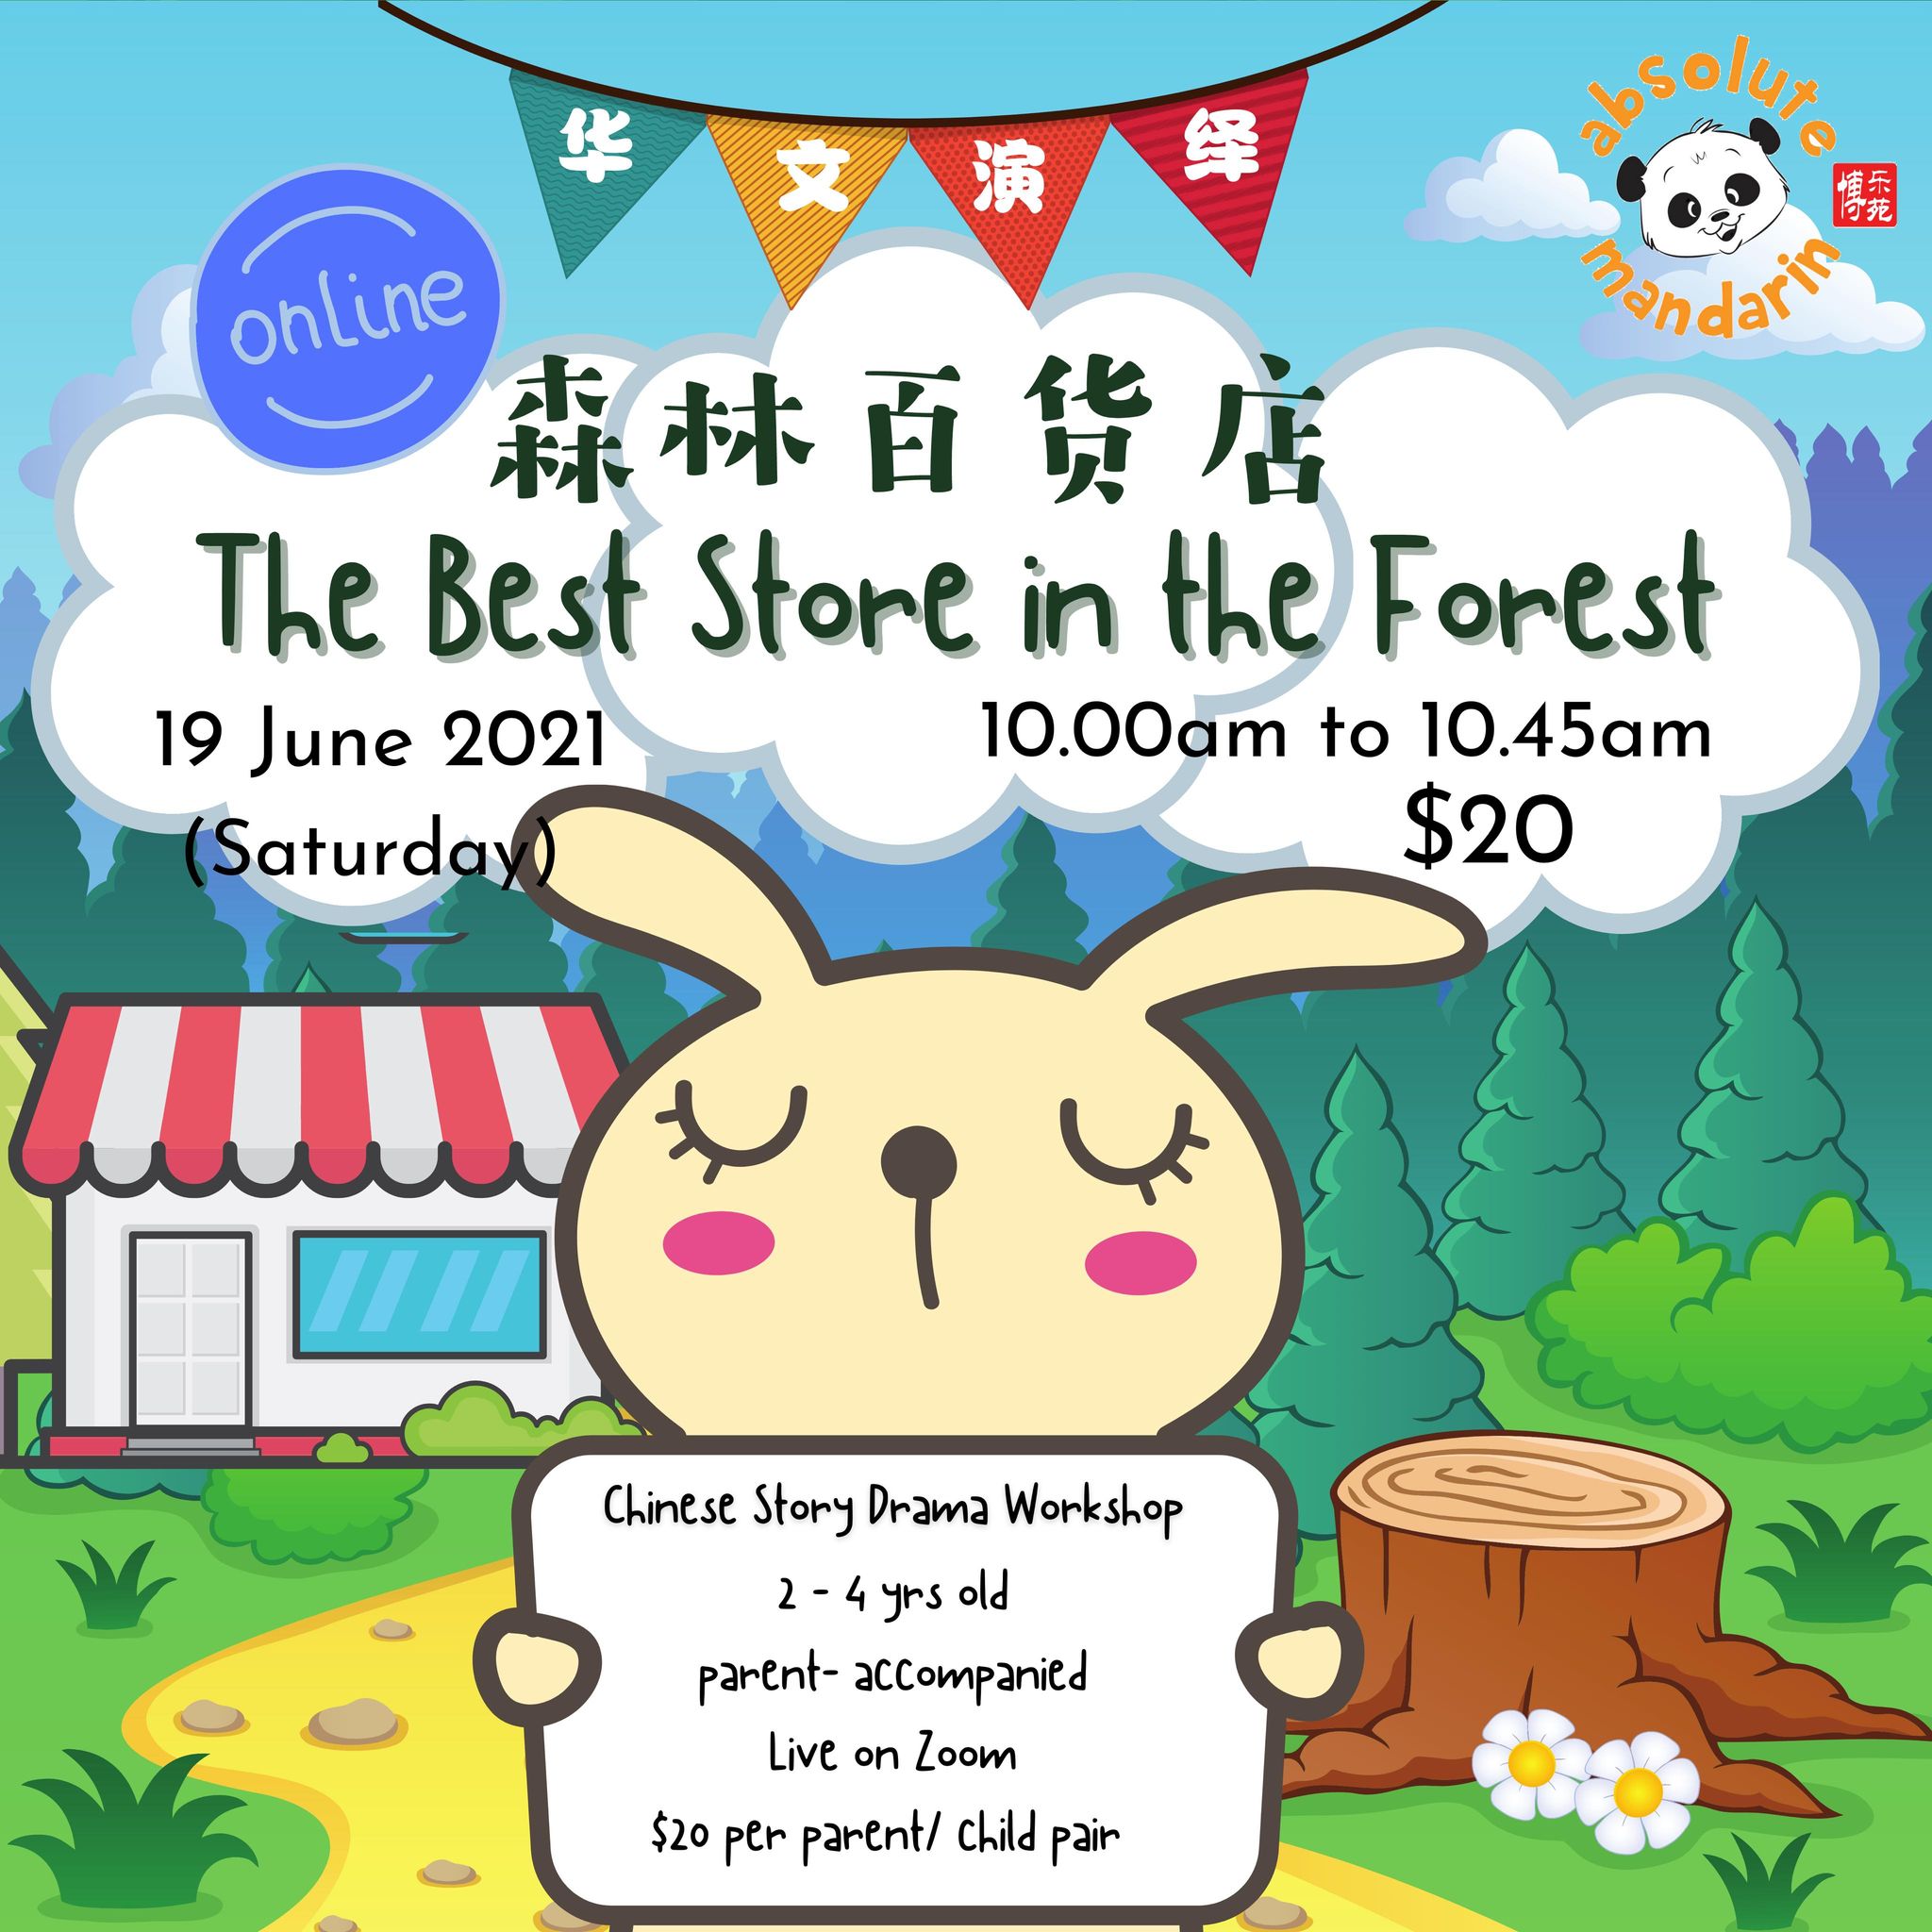 The Best Store in the Forest